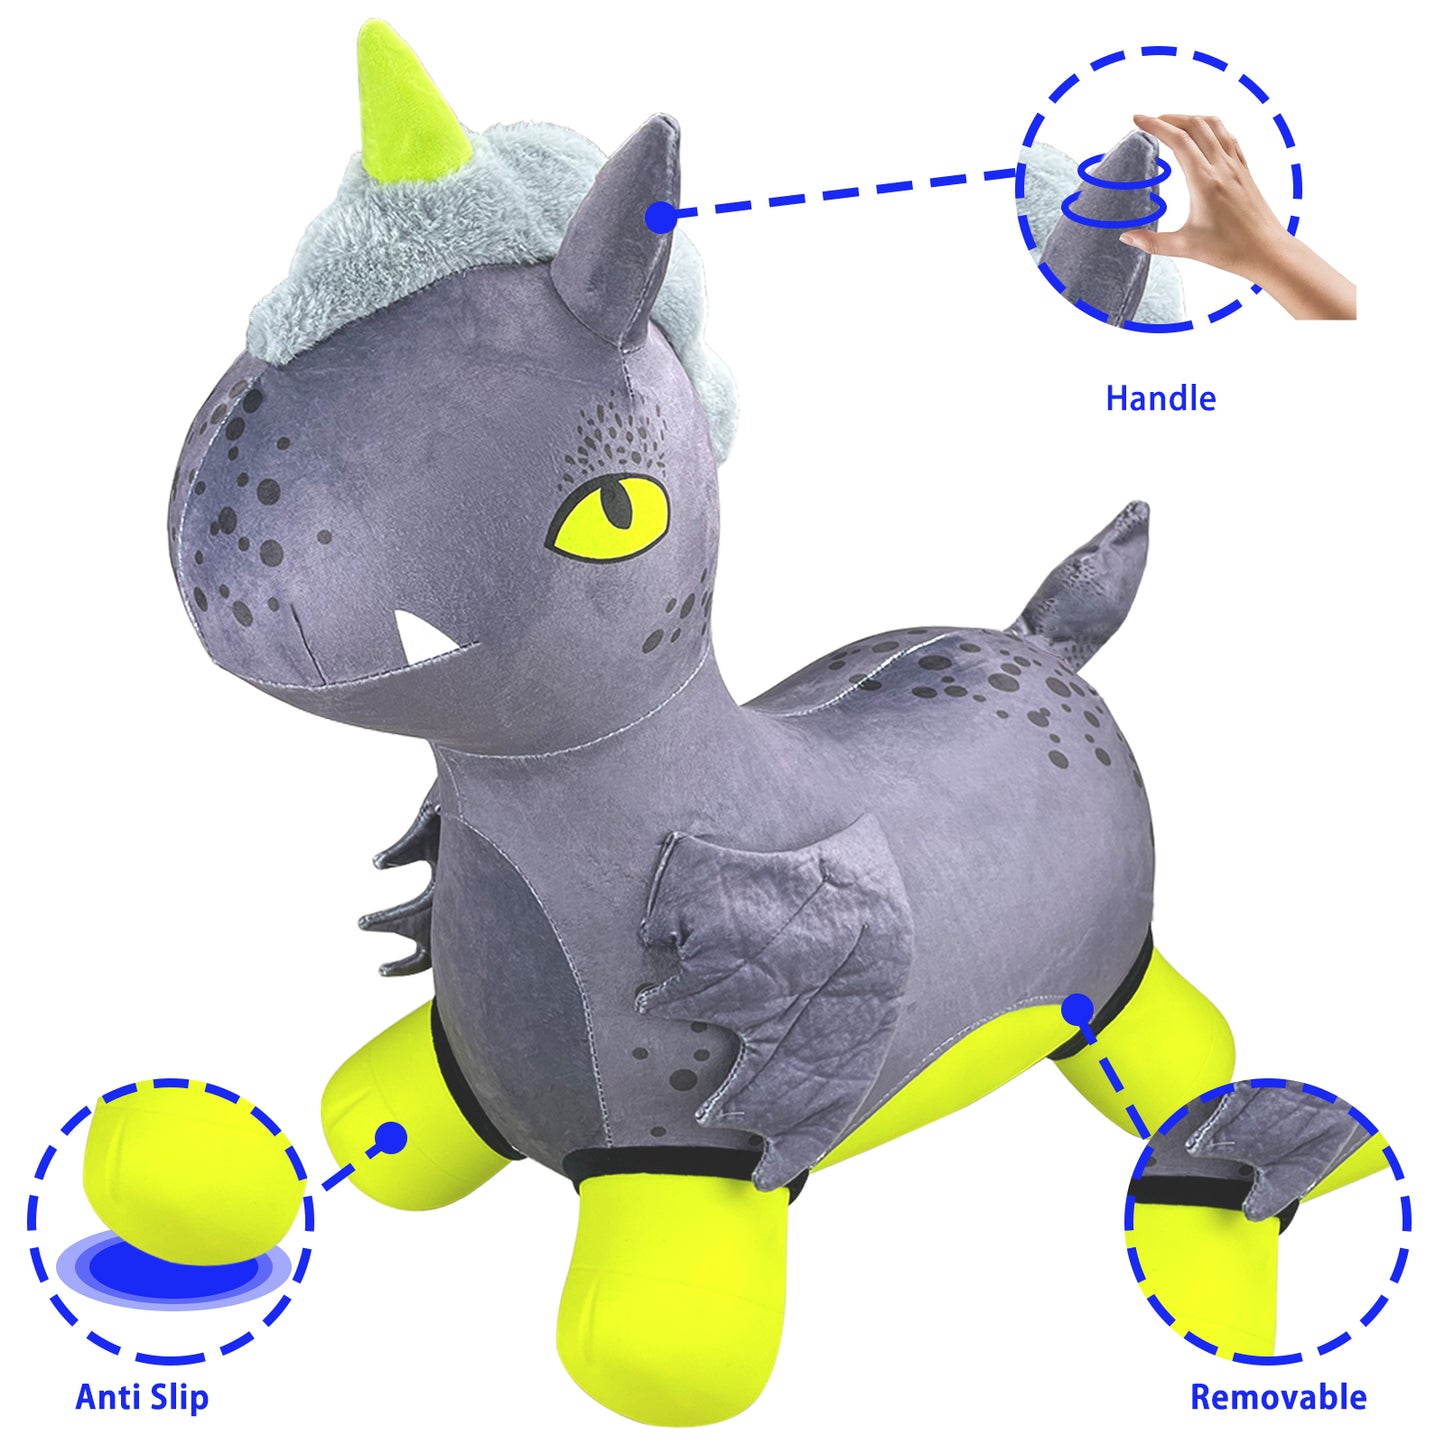 Bouncy Horse - Baby Toys Inflatable Plush Bouncing Dinosaur Hopper, Indoor Outdoor Toys Ride On Animal with Pump for Boys Girls Toddlers Birthday Party Gifts